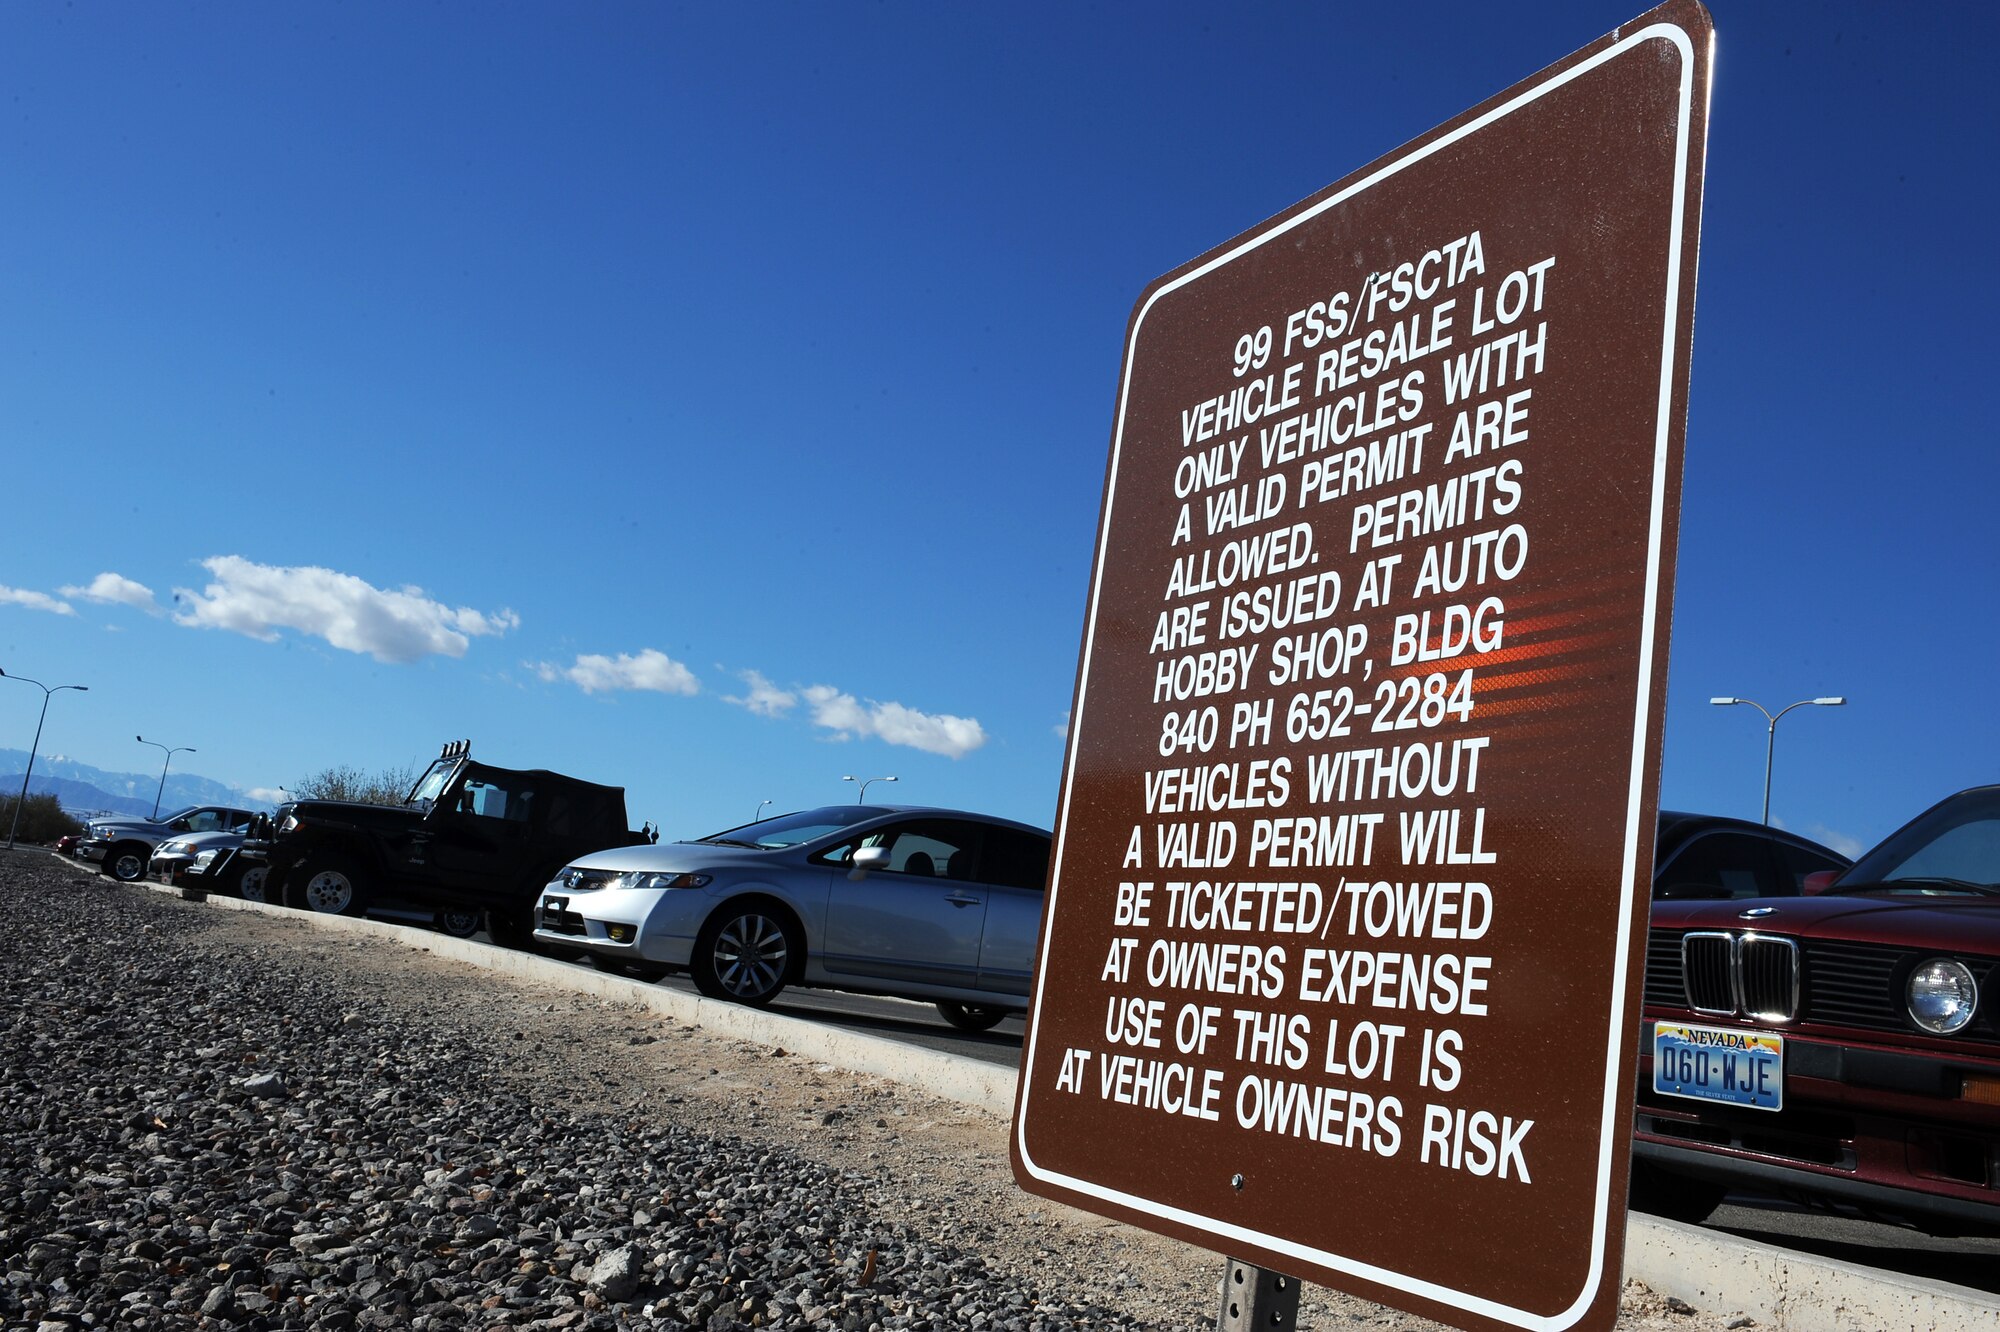 Nellis Air Force Base Resale lot signs advise motorist, vehicles parked in the lot without the proper permit may be towed at the owners expense. Parking lots on base are intended for daily-use by workers and guests, but some vehicles have been left for extended periods of time causing a parking issue. (U.S. Air Force photo by Senior Airman Jack Sanders)